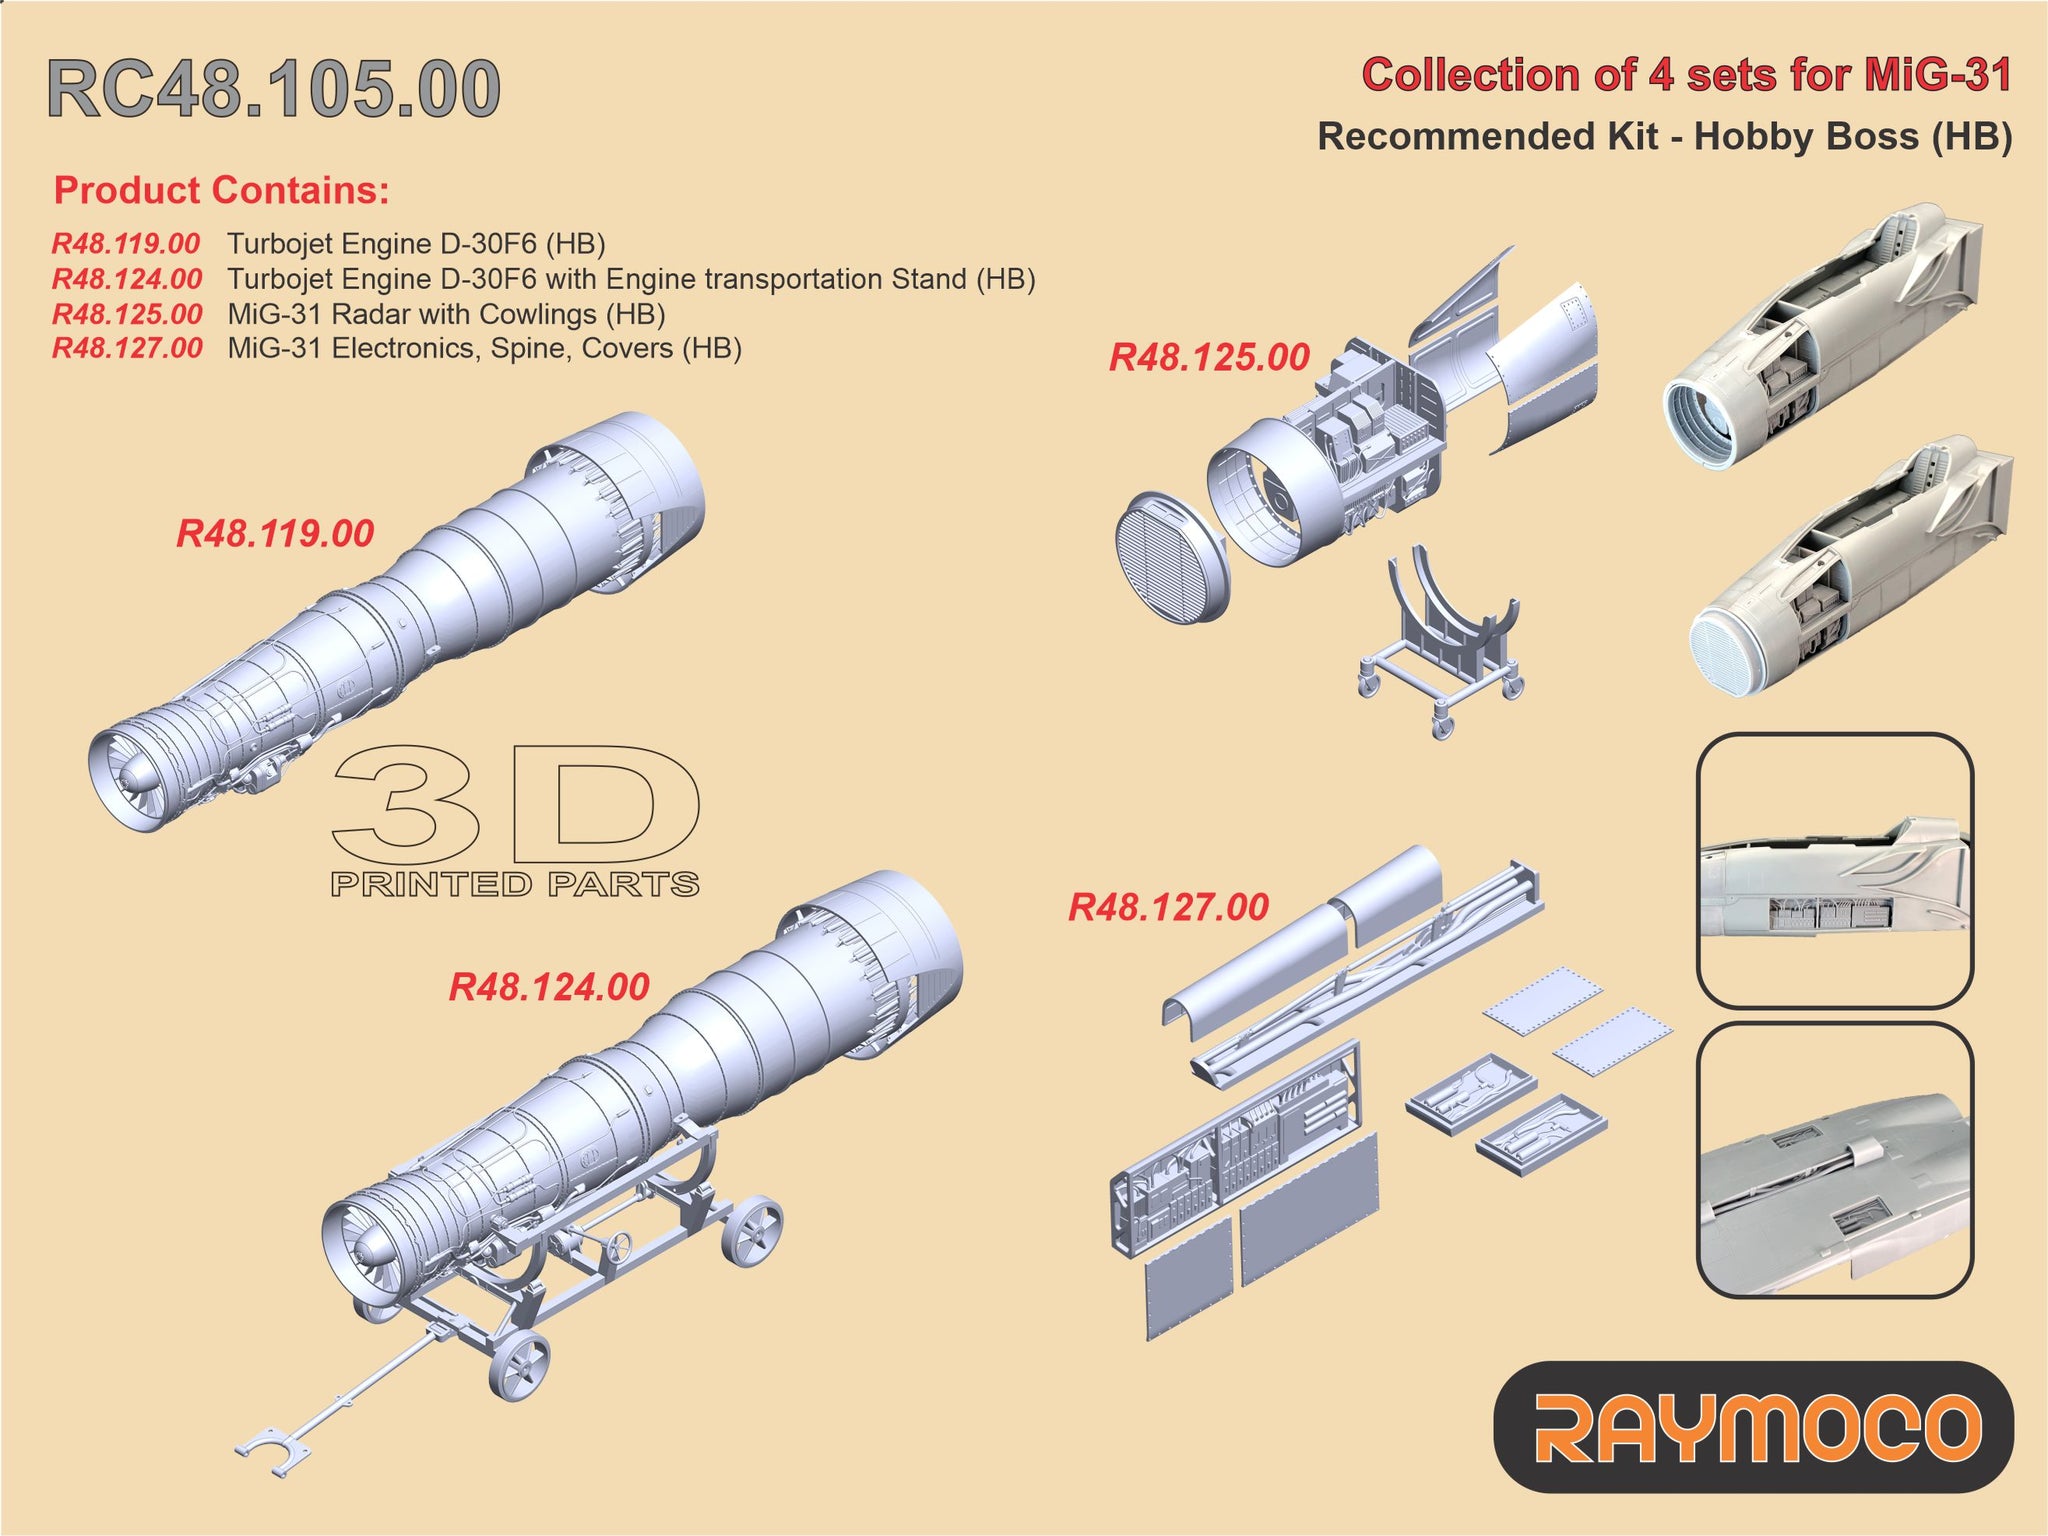 RC45.105.00  1/48 Collection of 4 sets for MiG-31. Recommended Kit - HB